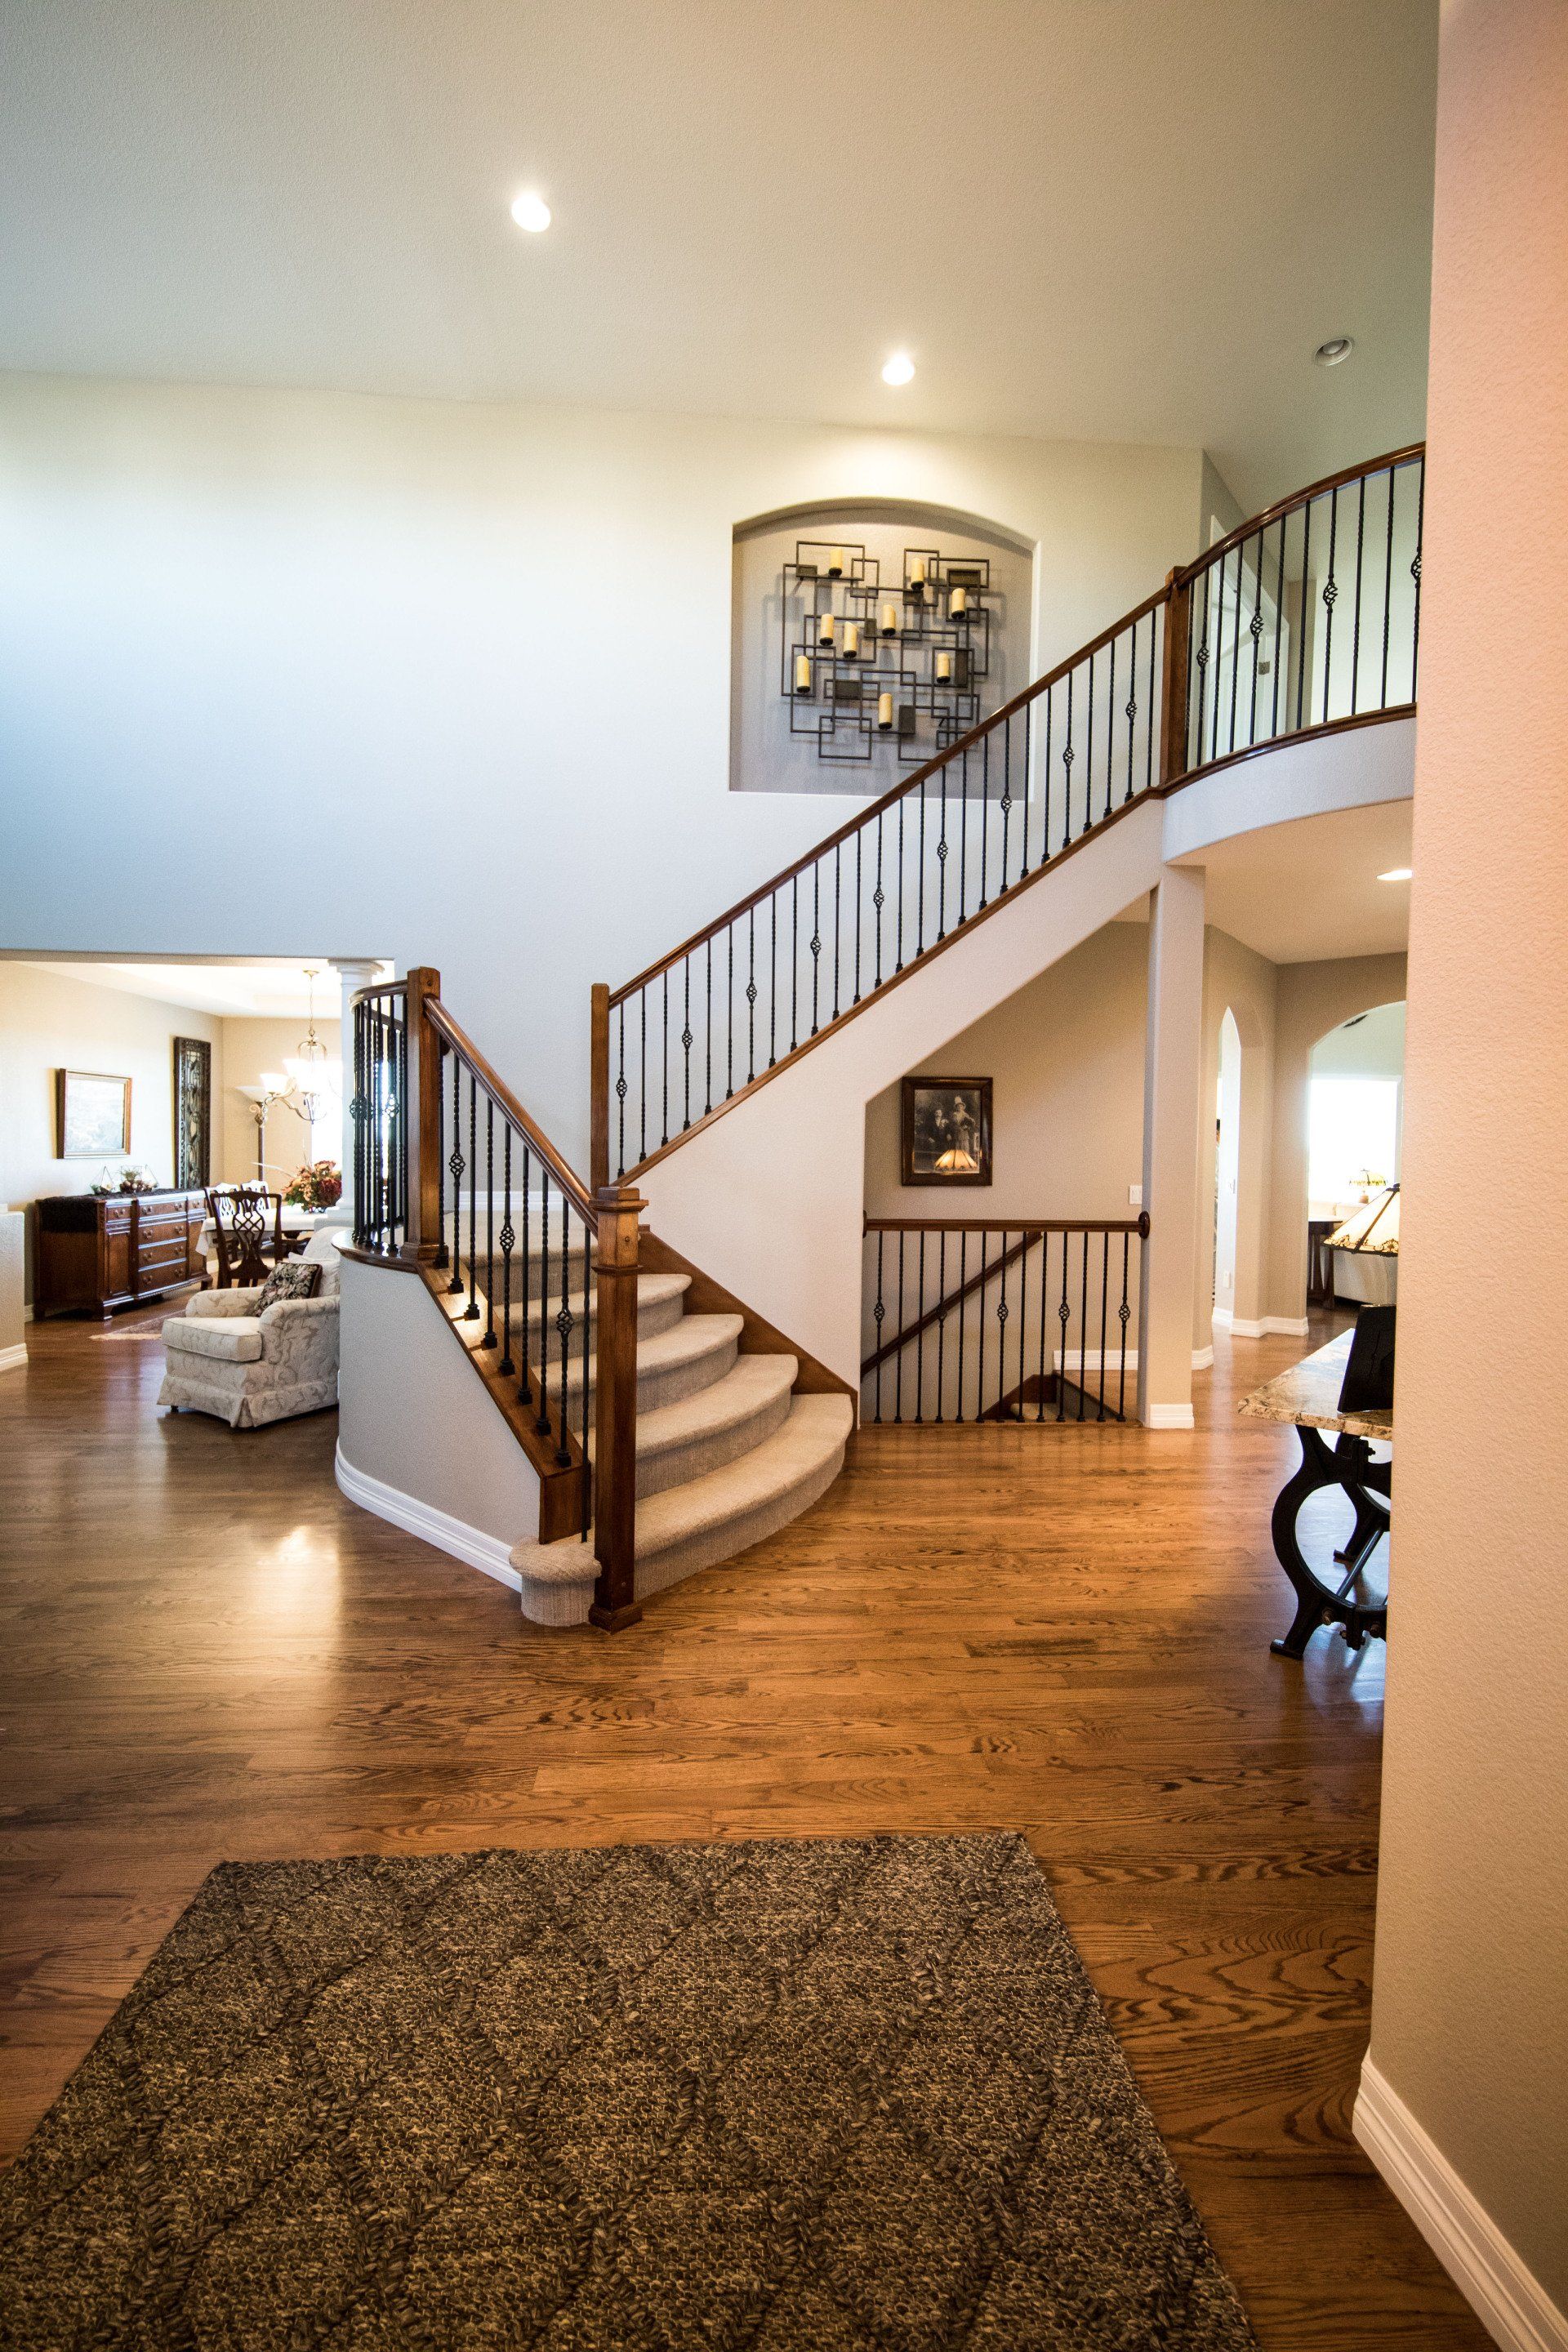 A large staircase in a house with a rug on the floor.